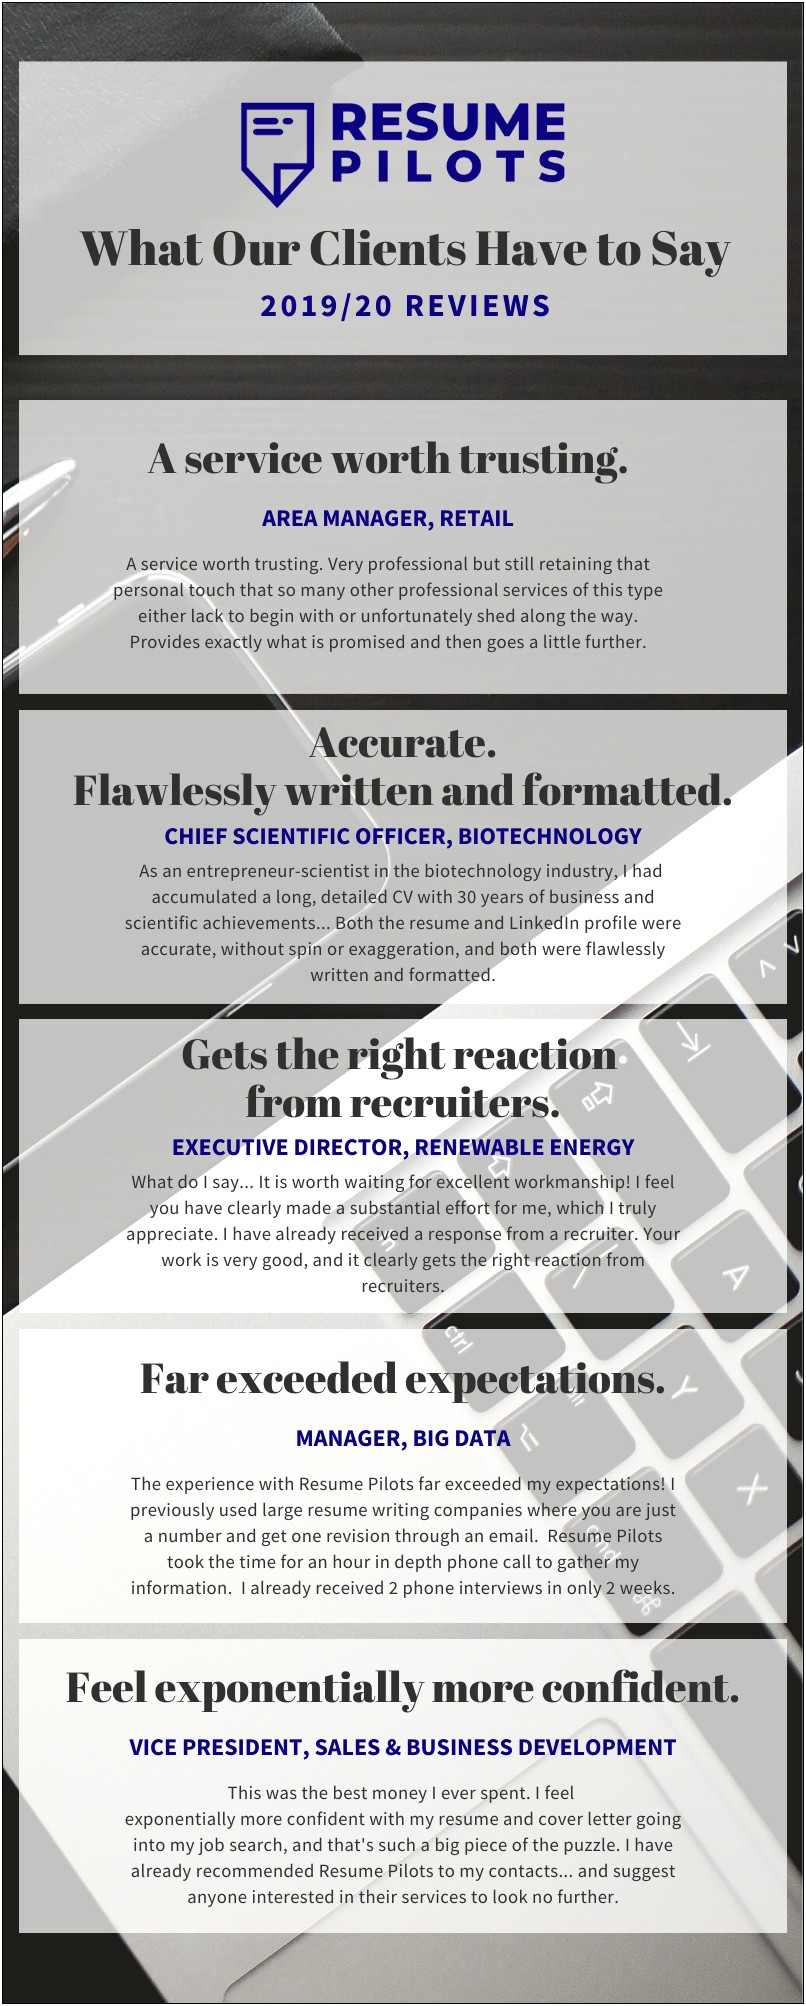 The Best Writing Resume Service